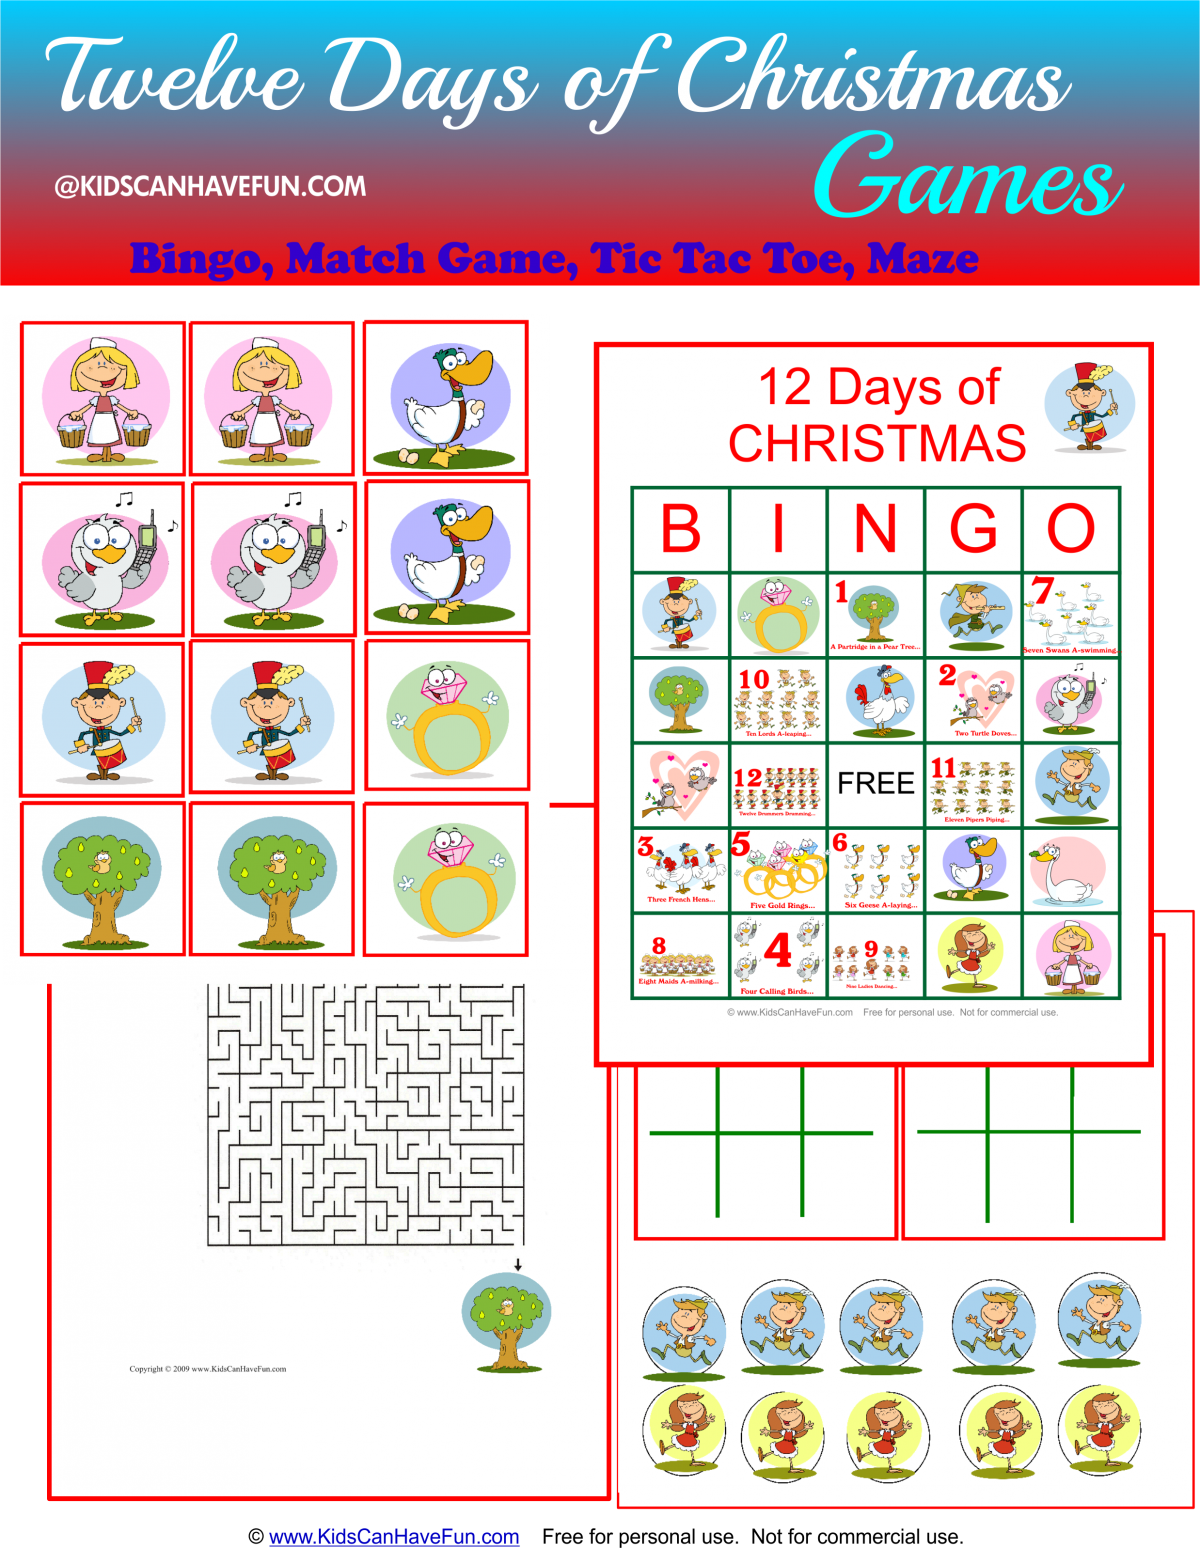 The Twelve Days of Christmas Activities, Singalong Printables